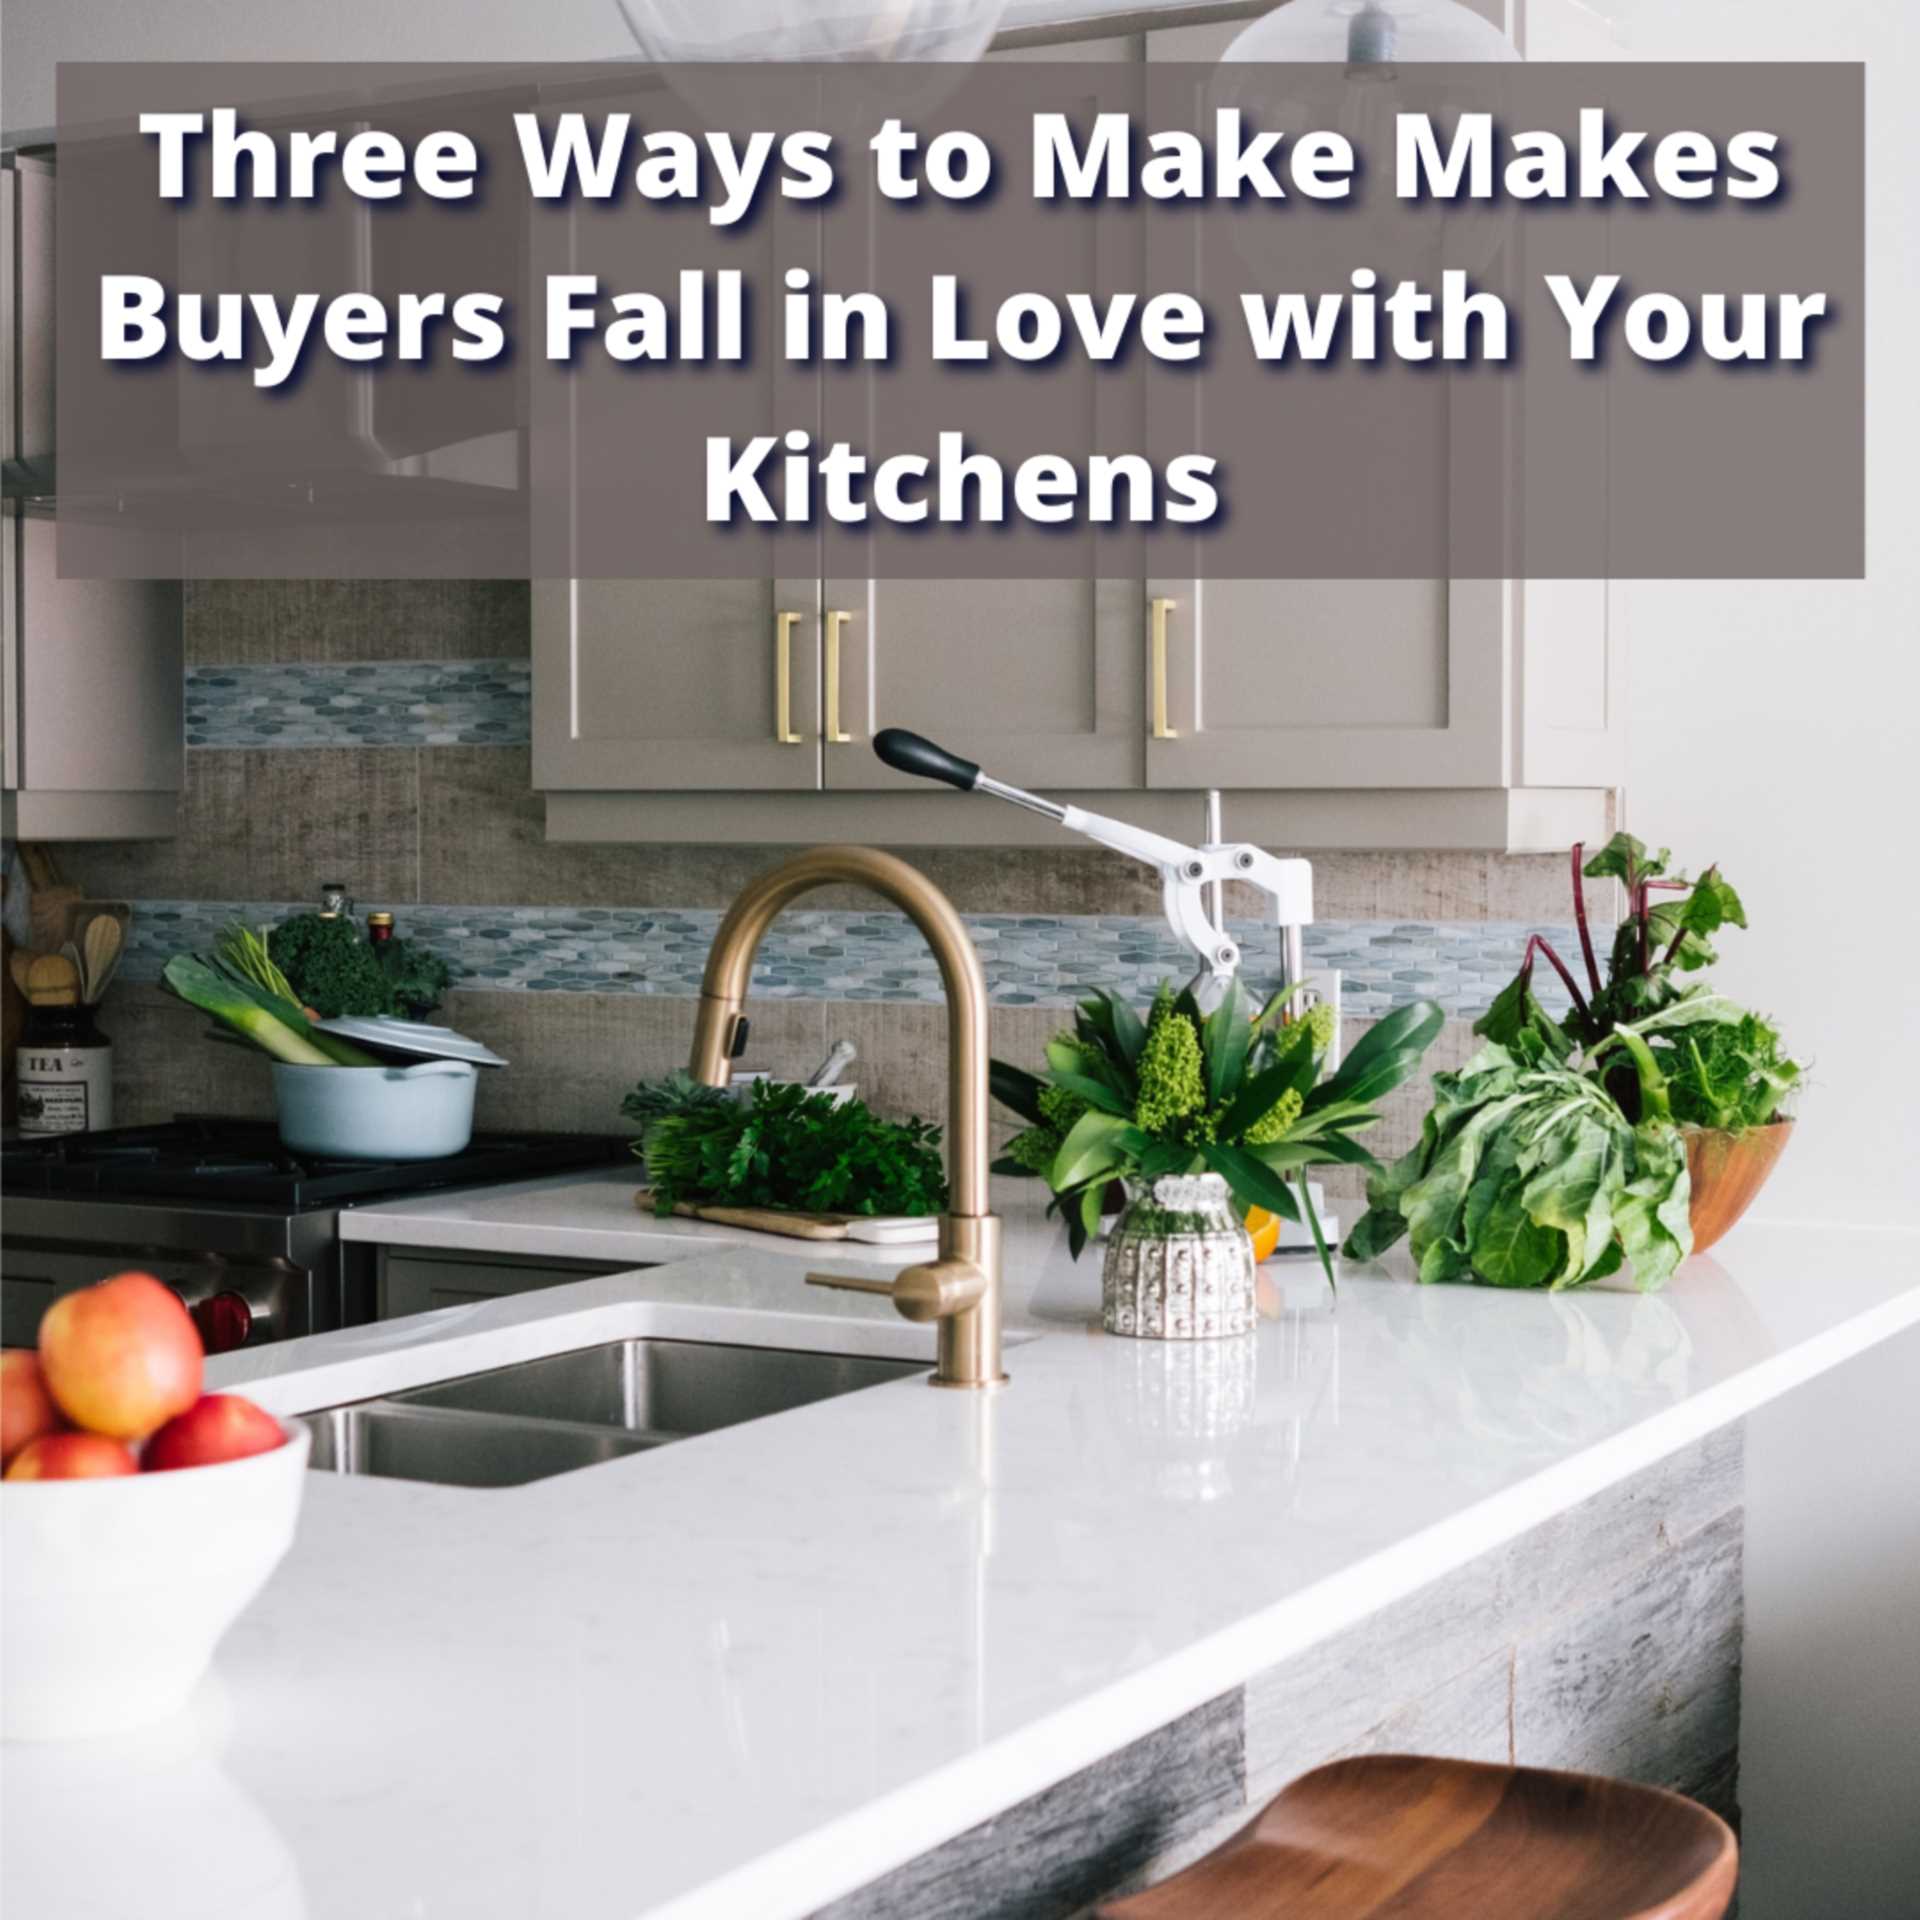 Three Ways to Make Makes Buyers Fall in Love with Your Kitchens